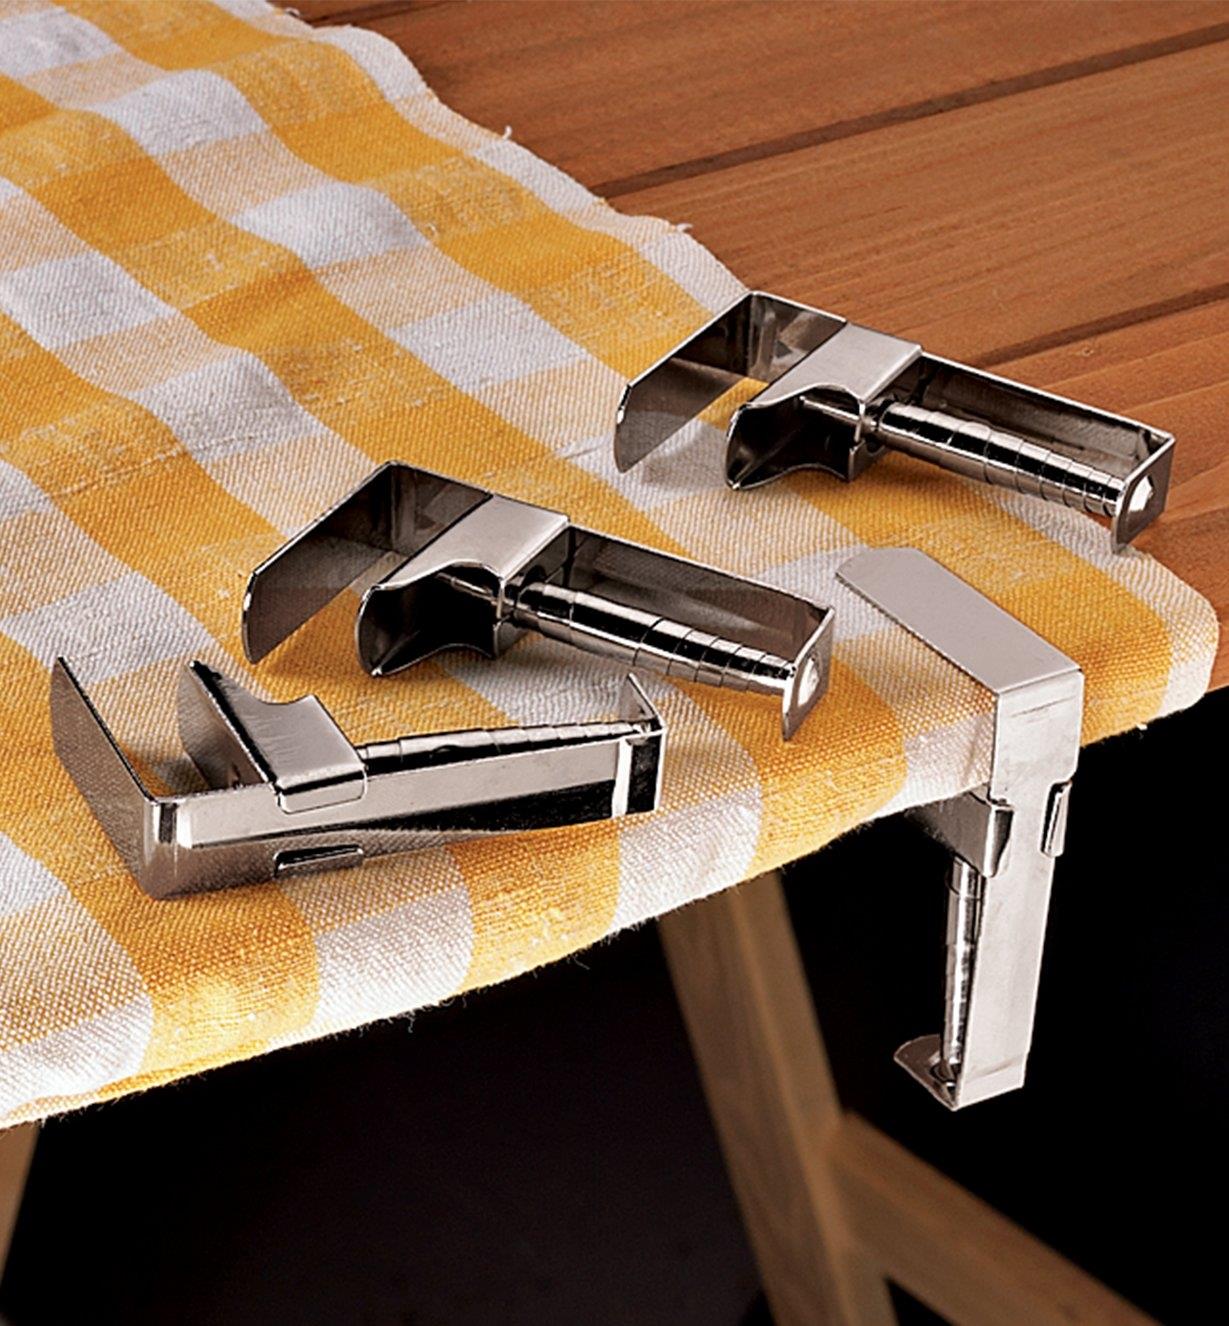 One tablecloth clip holding a tablecloth on a picnic table, and three clips lying next to it 